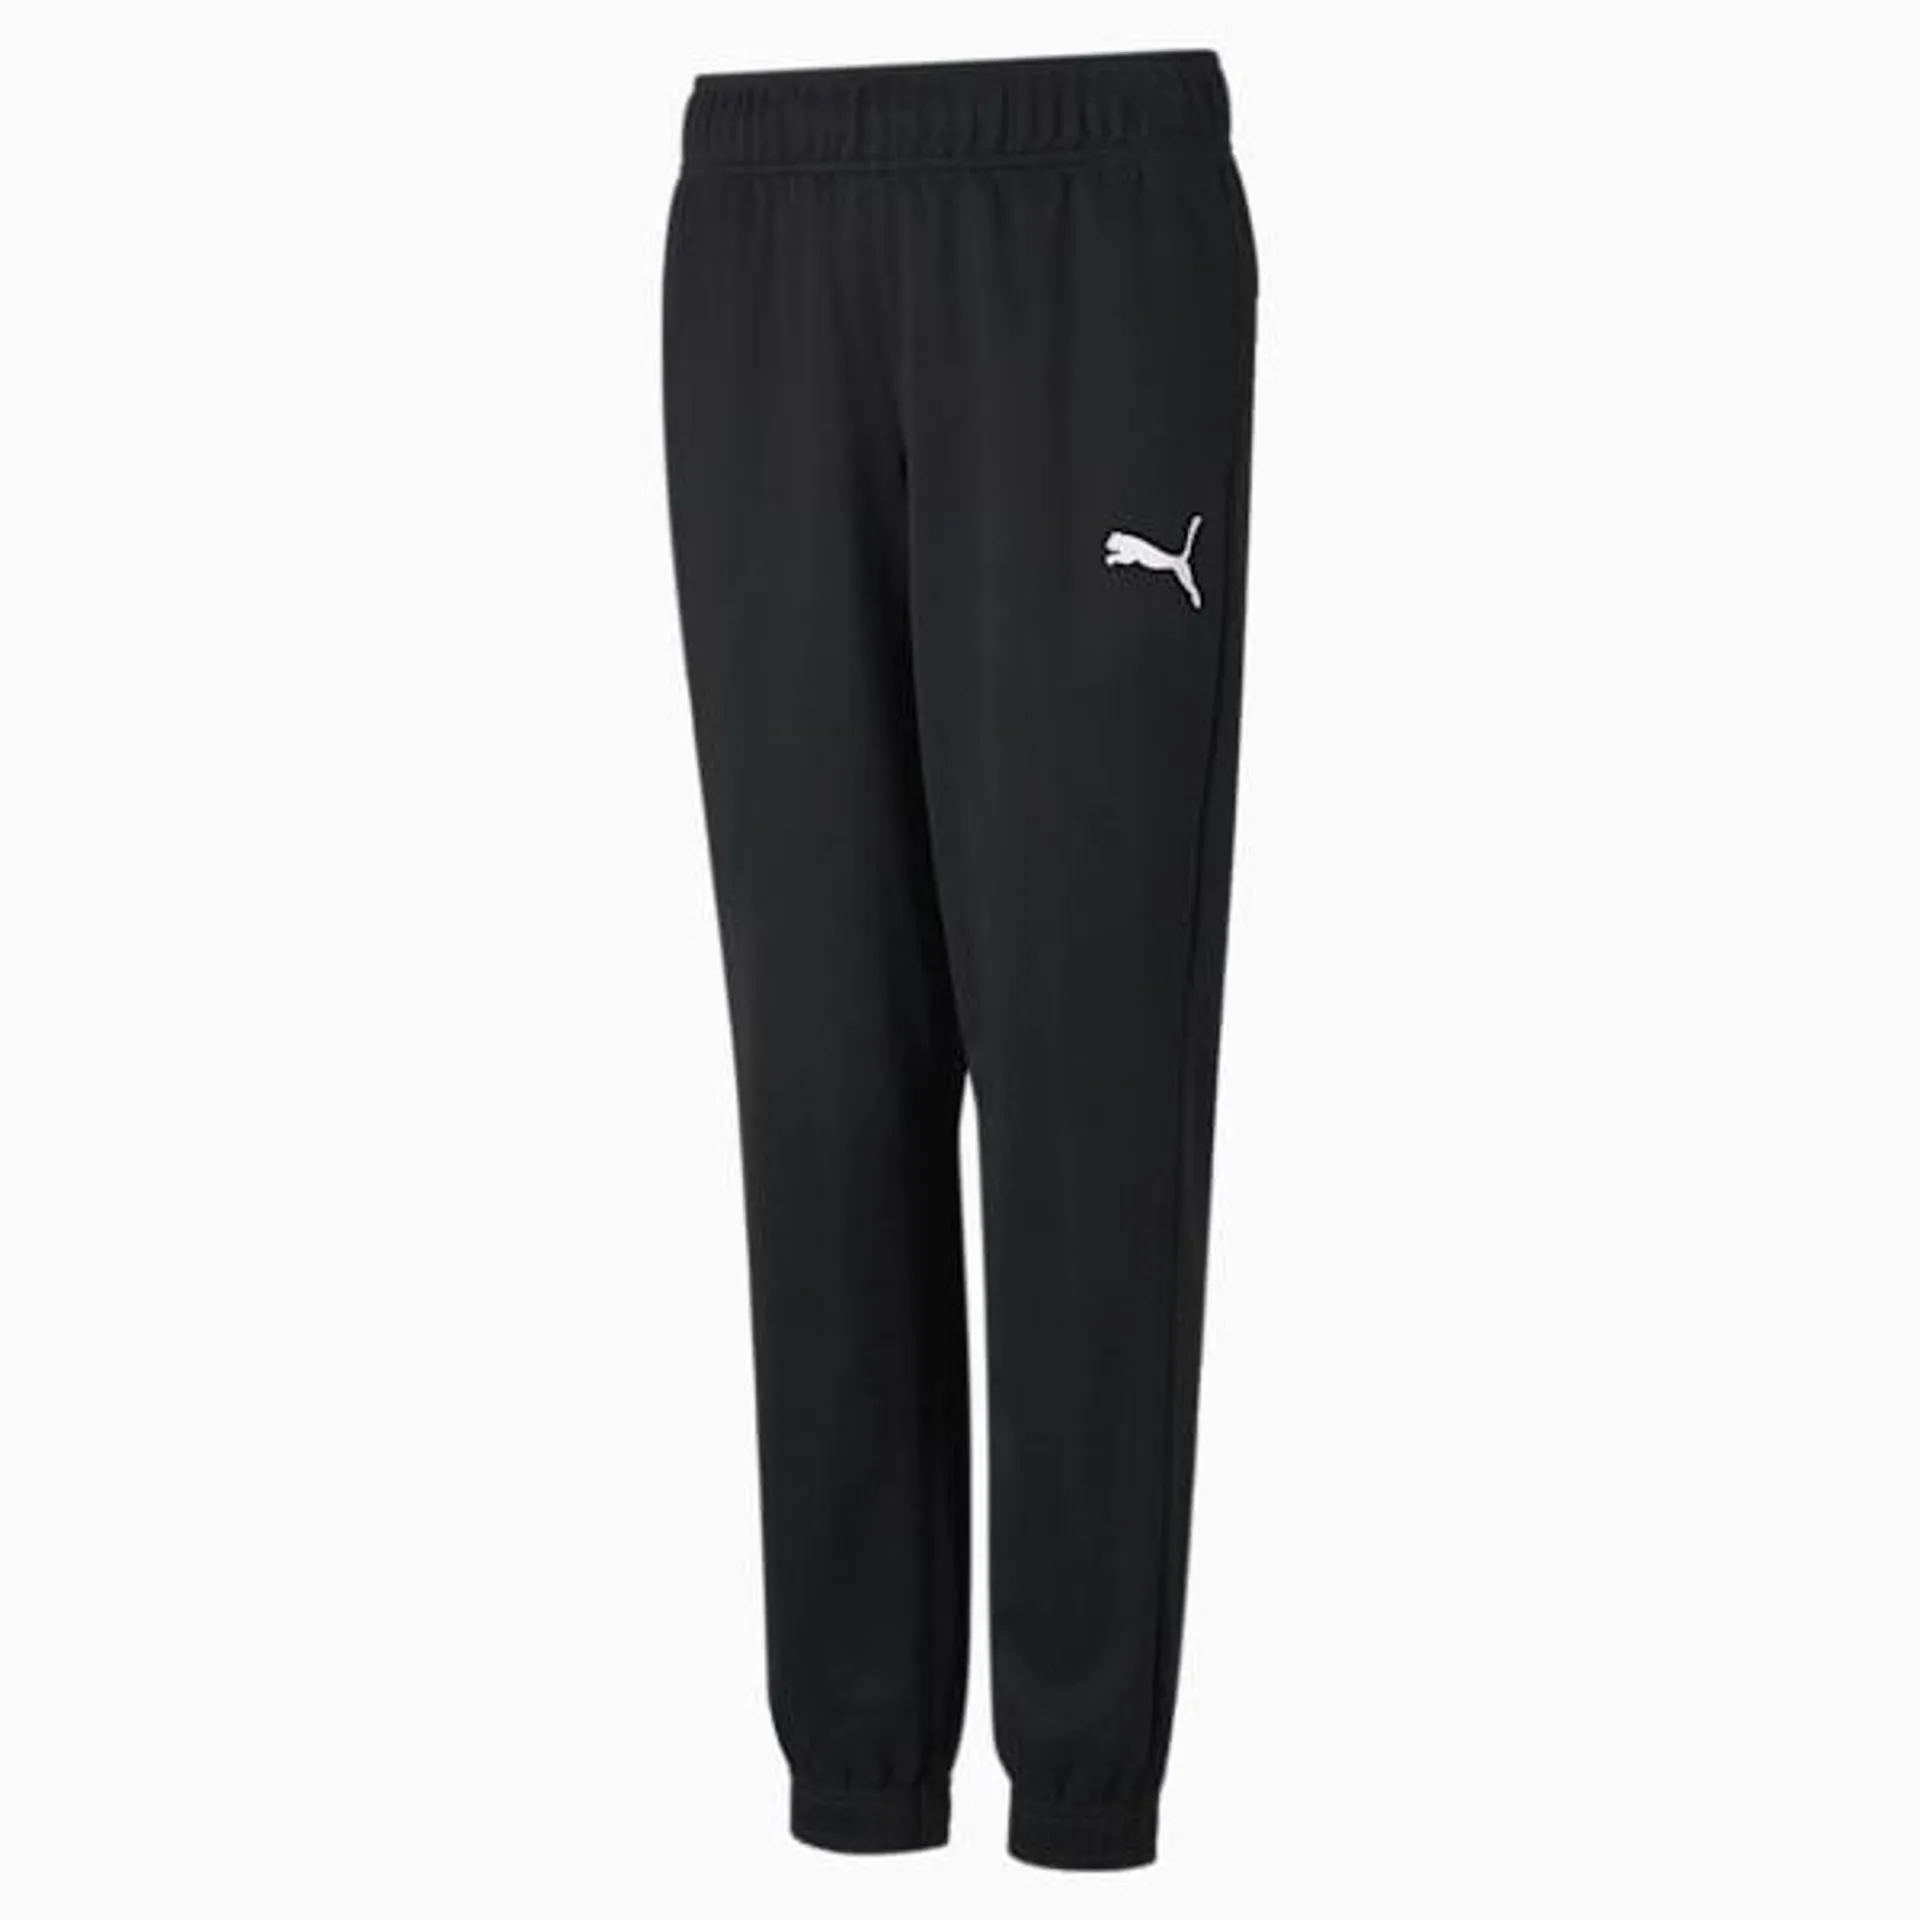 Active Tricot Youth Sweatpants